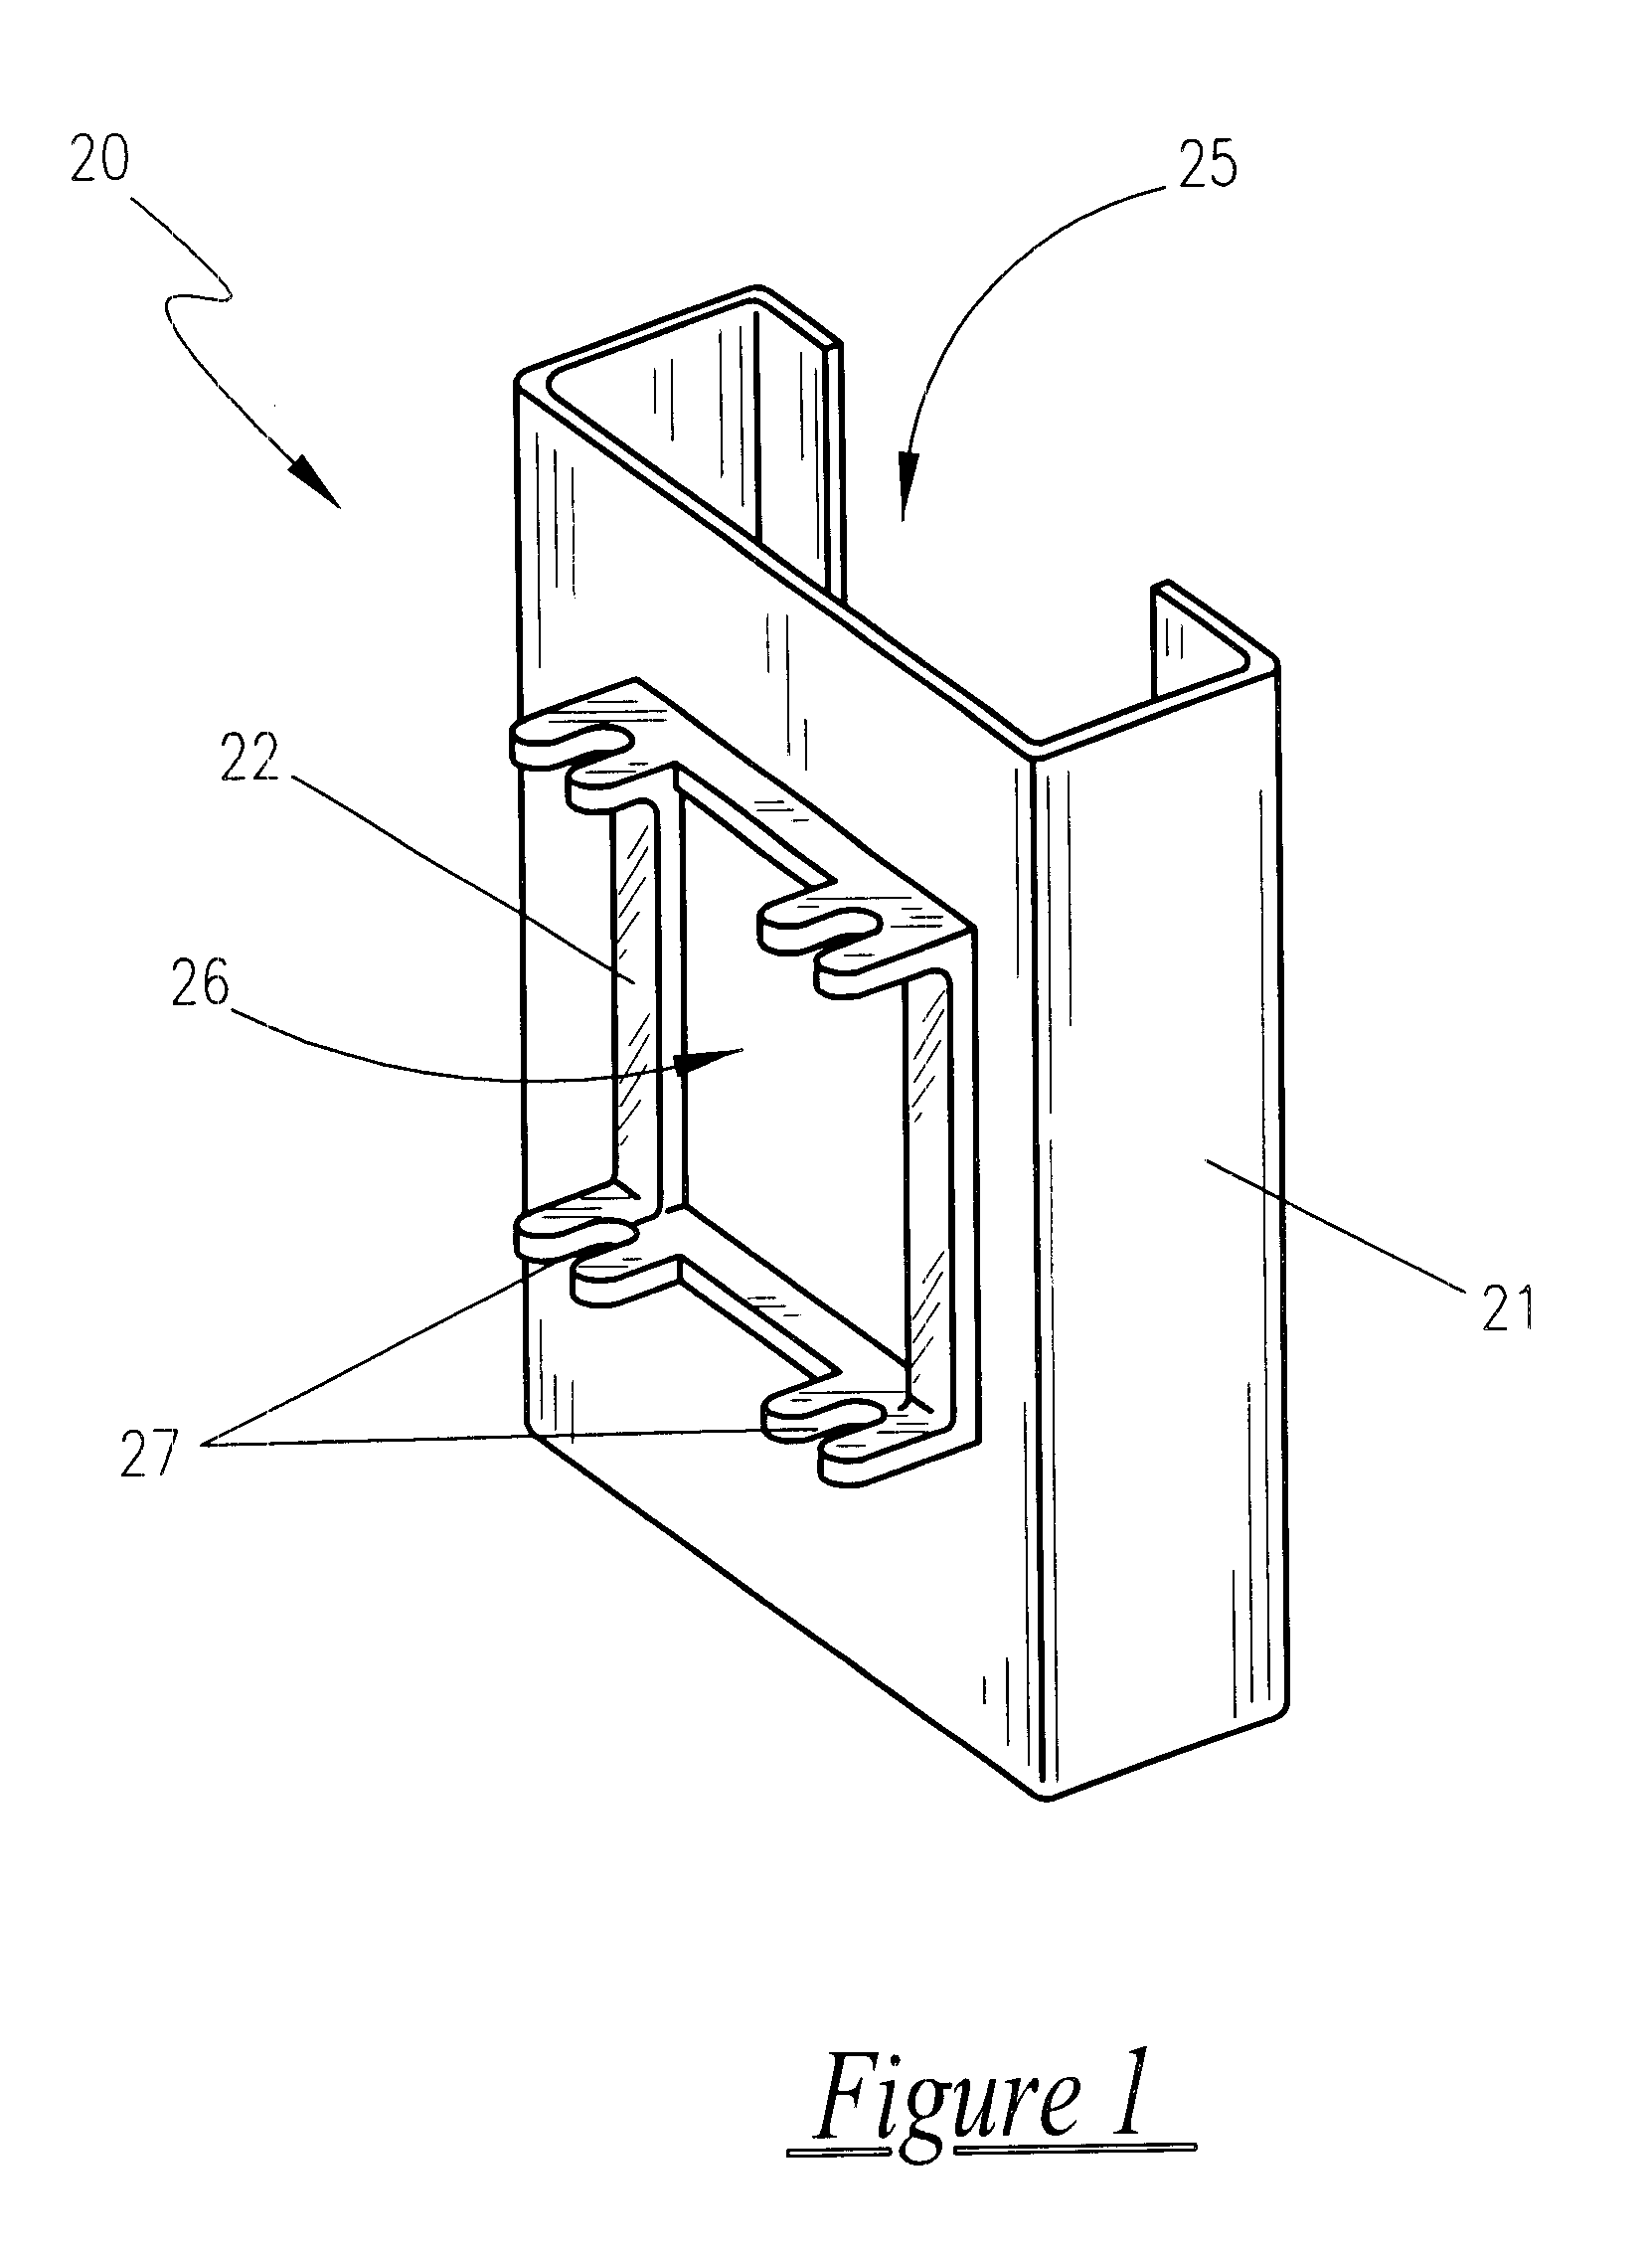 Securing device for personal pagers